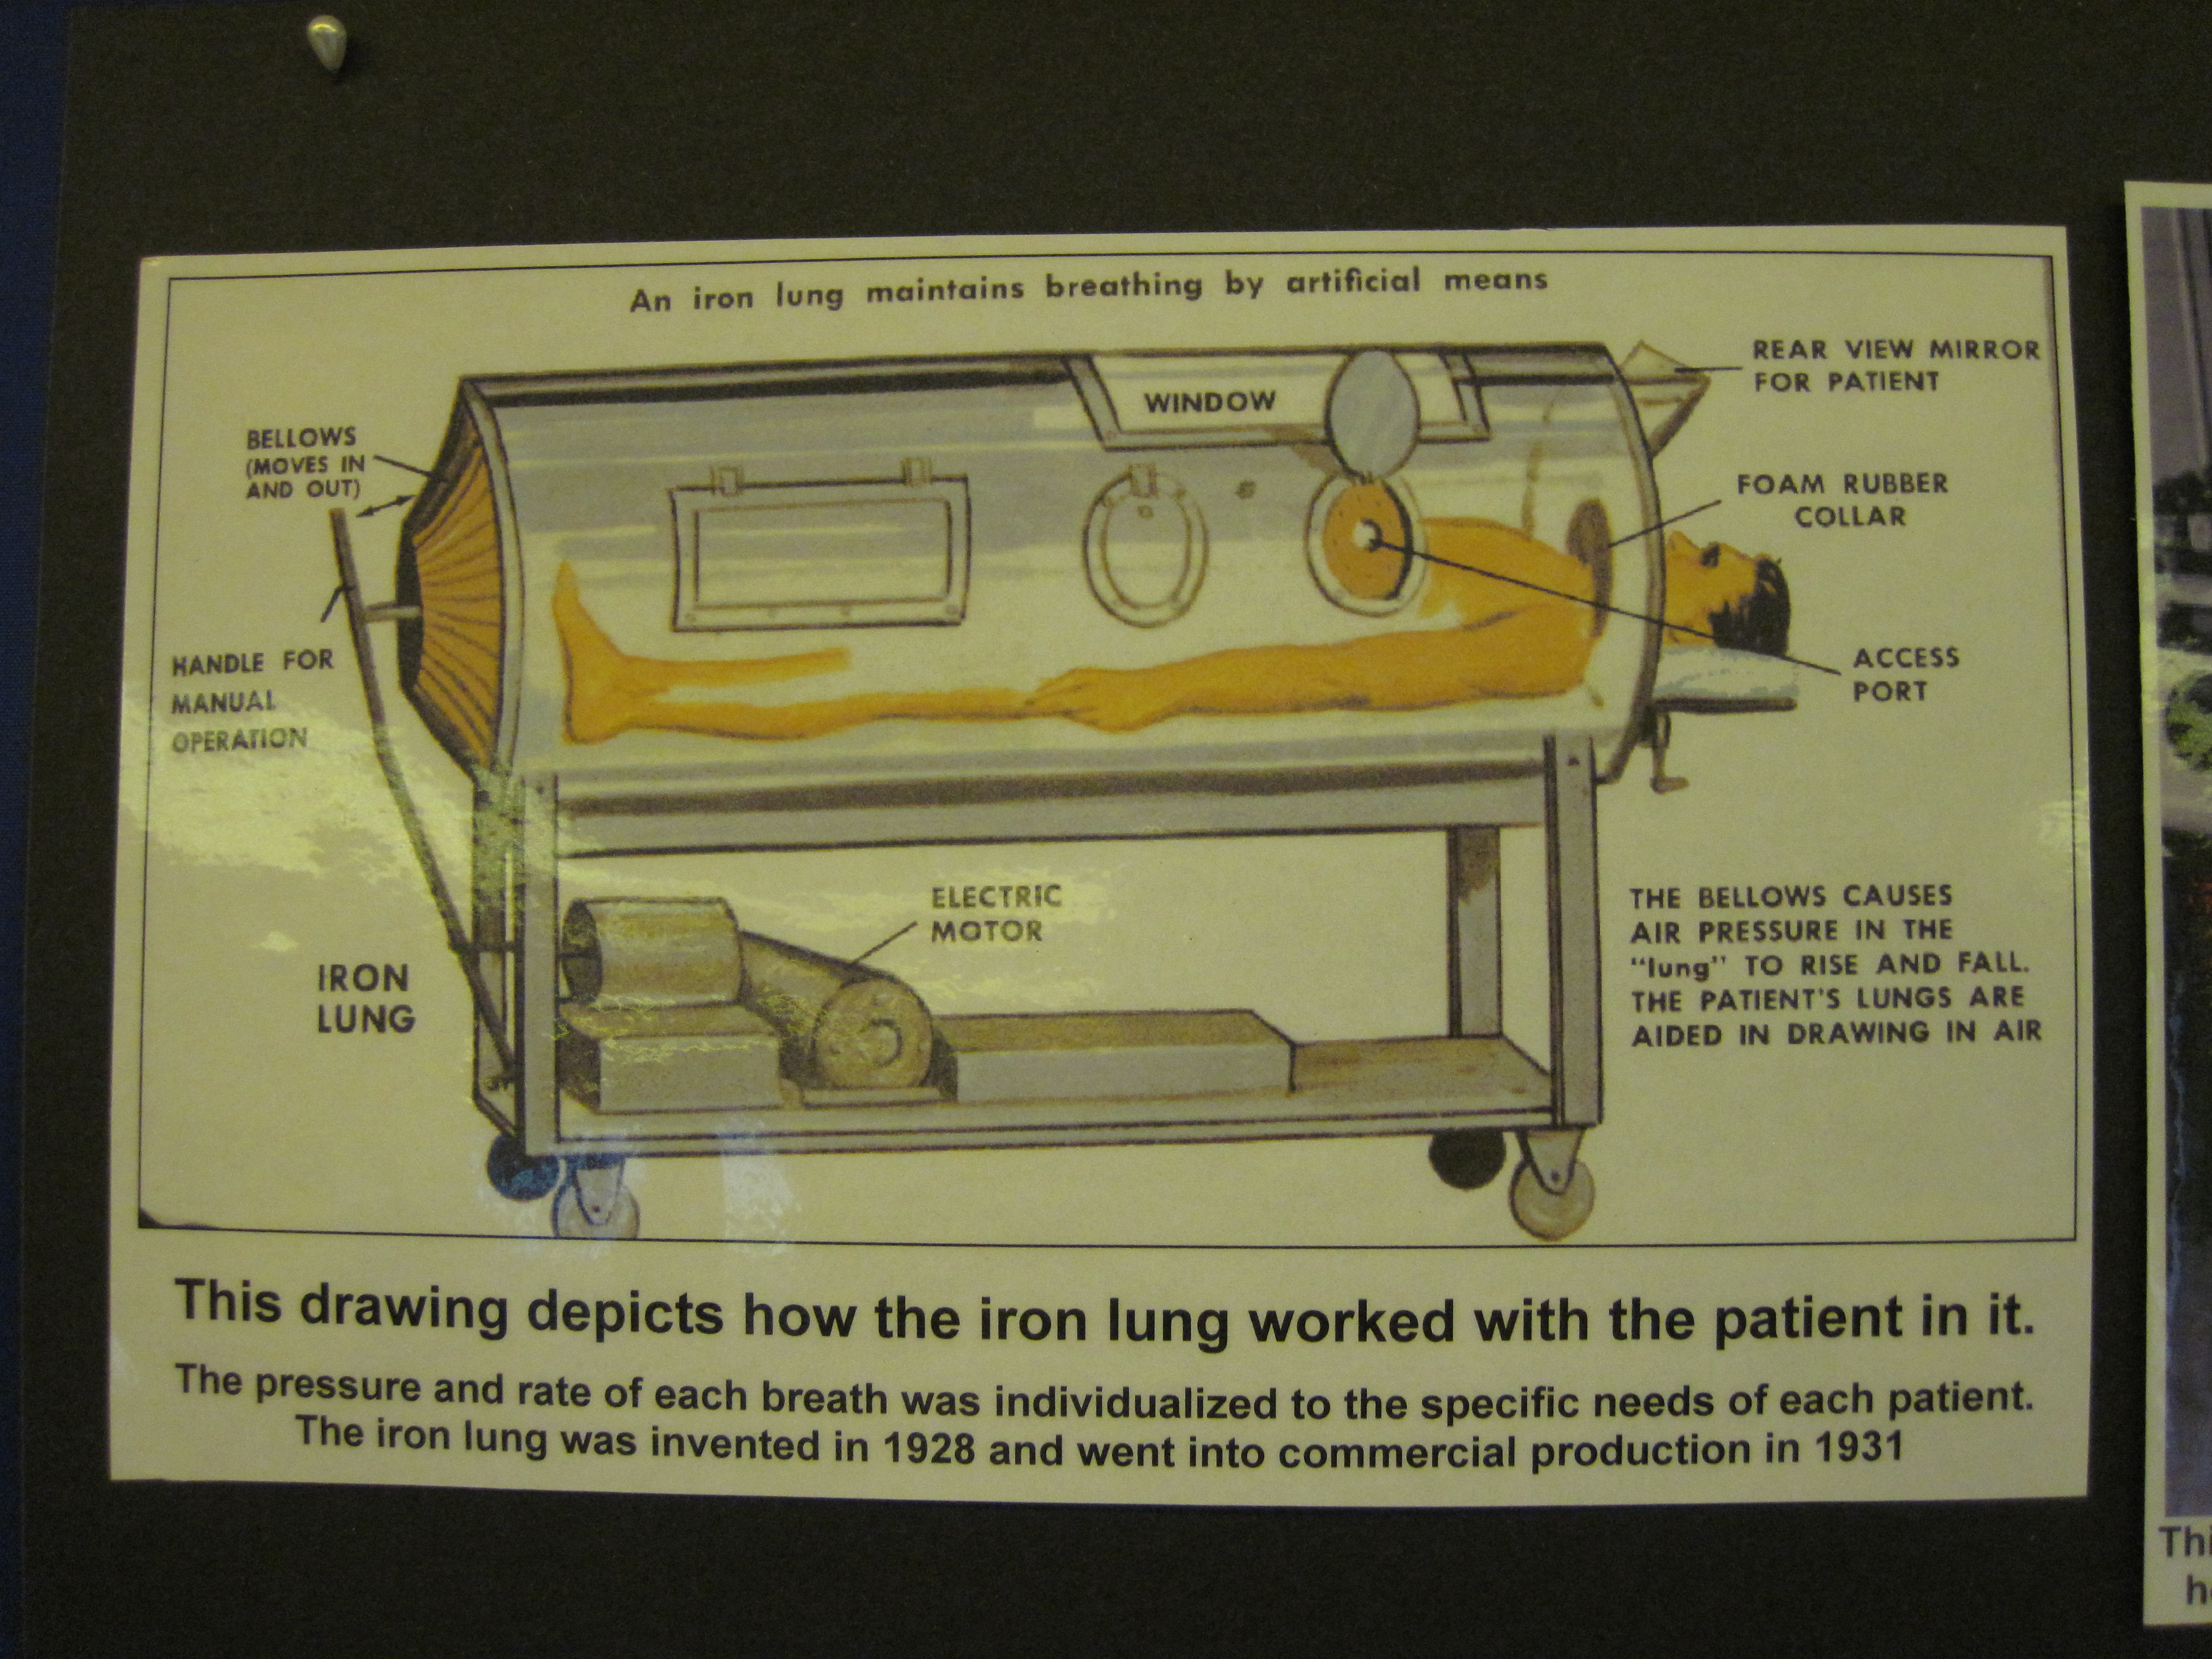 This picture depicts how the iron lung worked with the patient in it